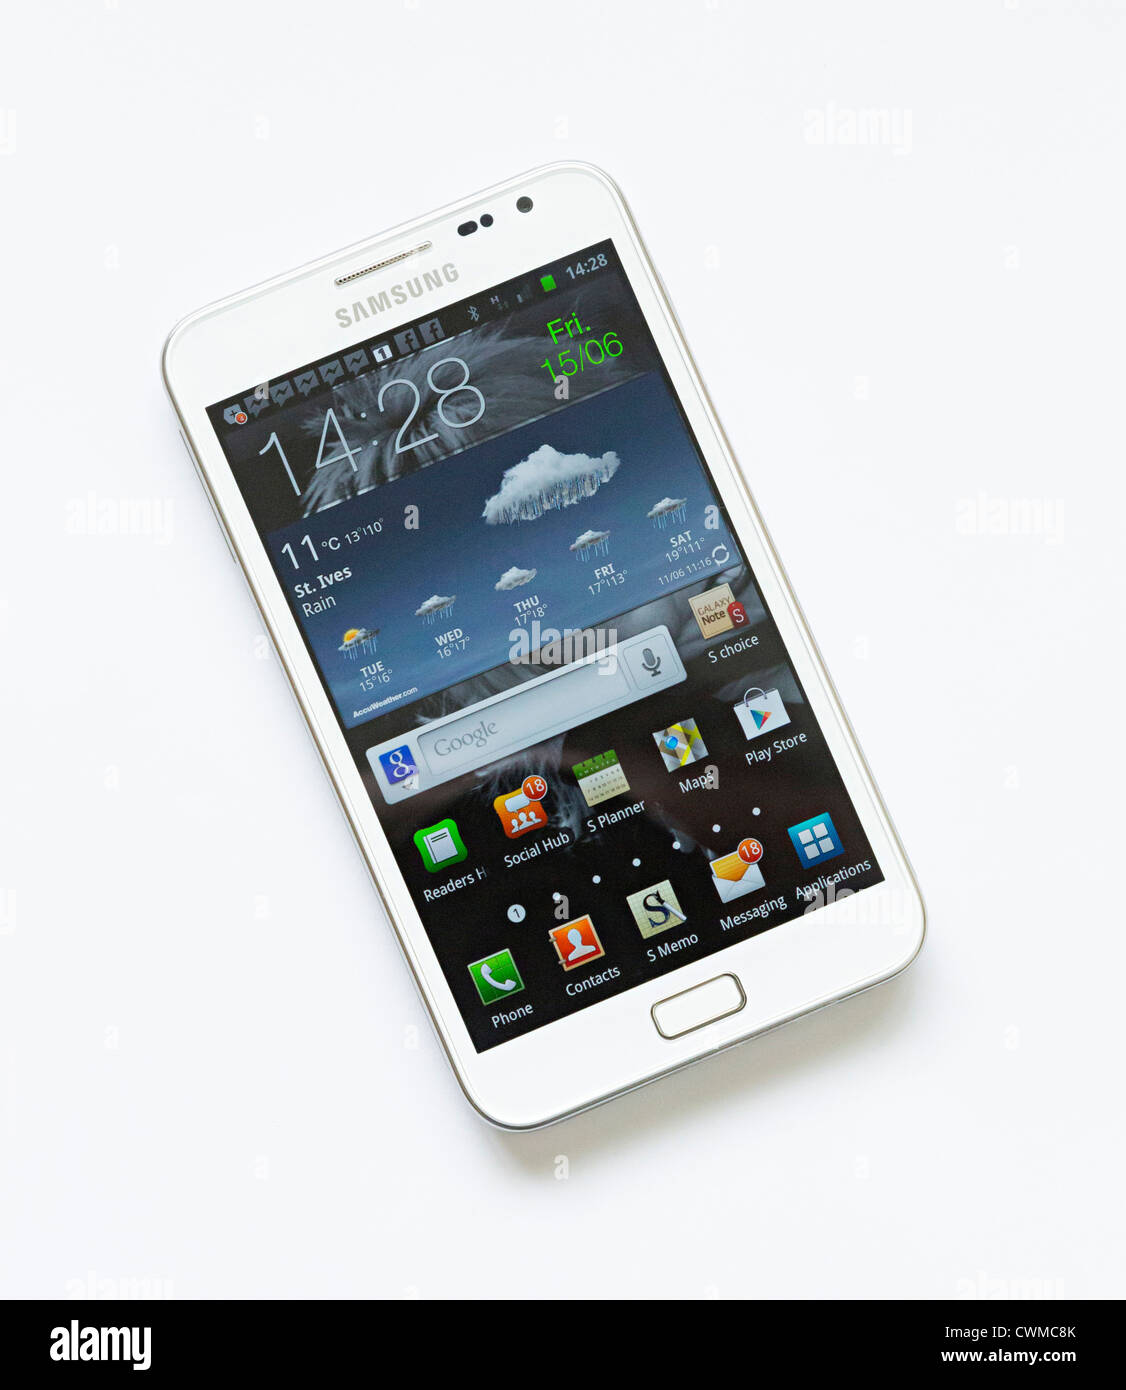 Samsung Galaxy Note smartphone with AMOLED  display Stock Photo